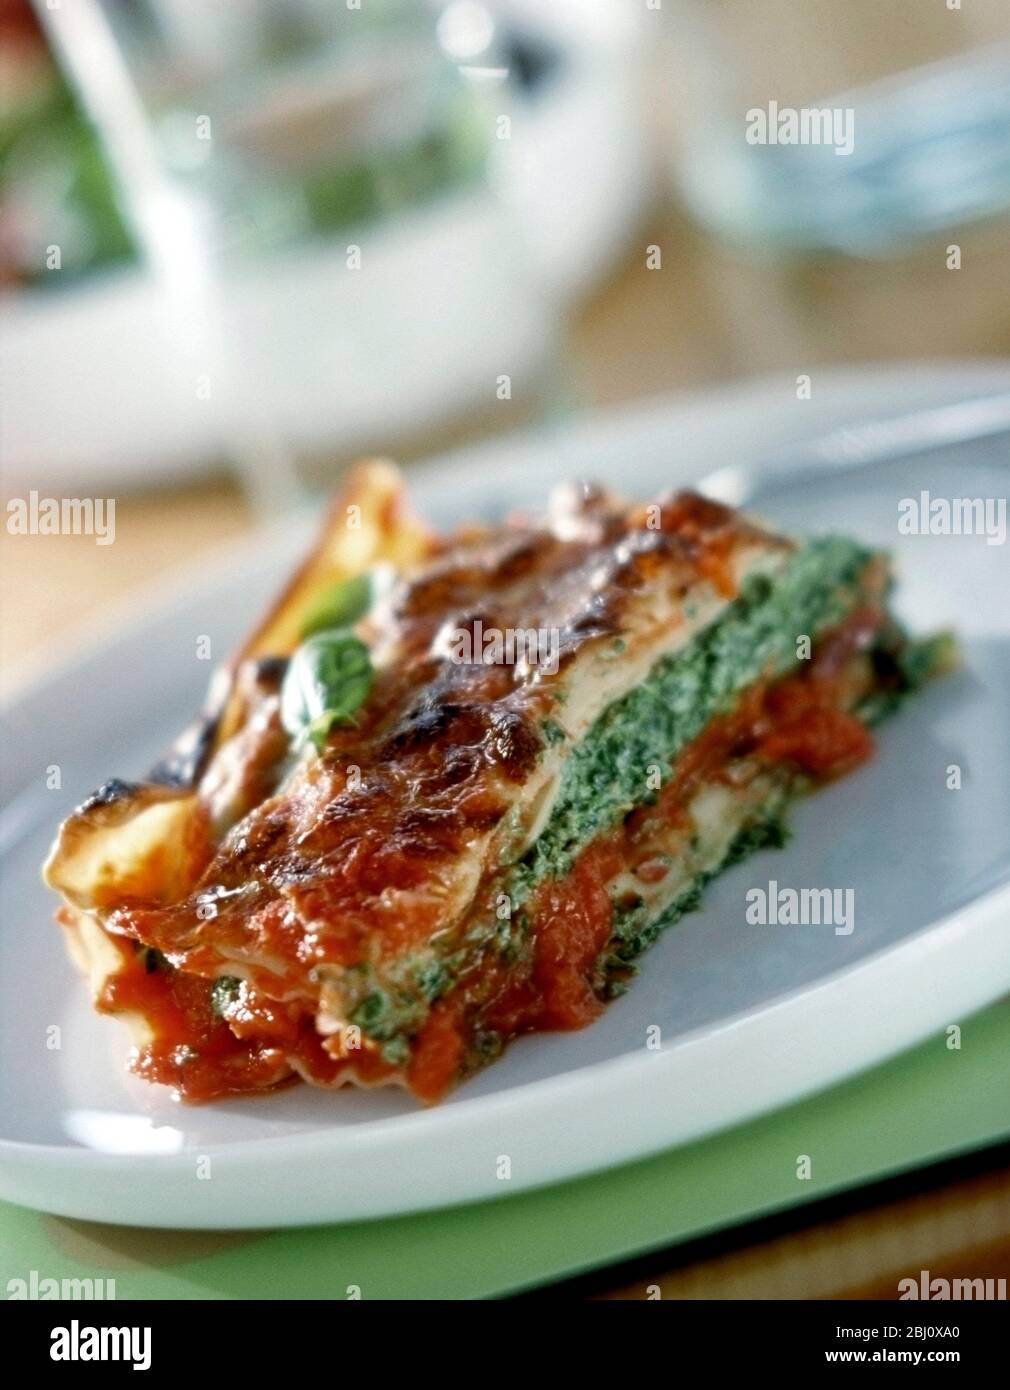 Vegetarian lasagne with spinach and tomato filling layers on white plate on green base with glasses and salad in bckground - Stock Photo